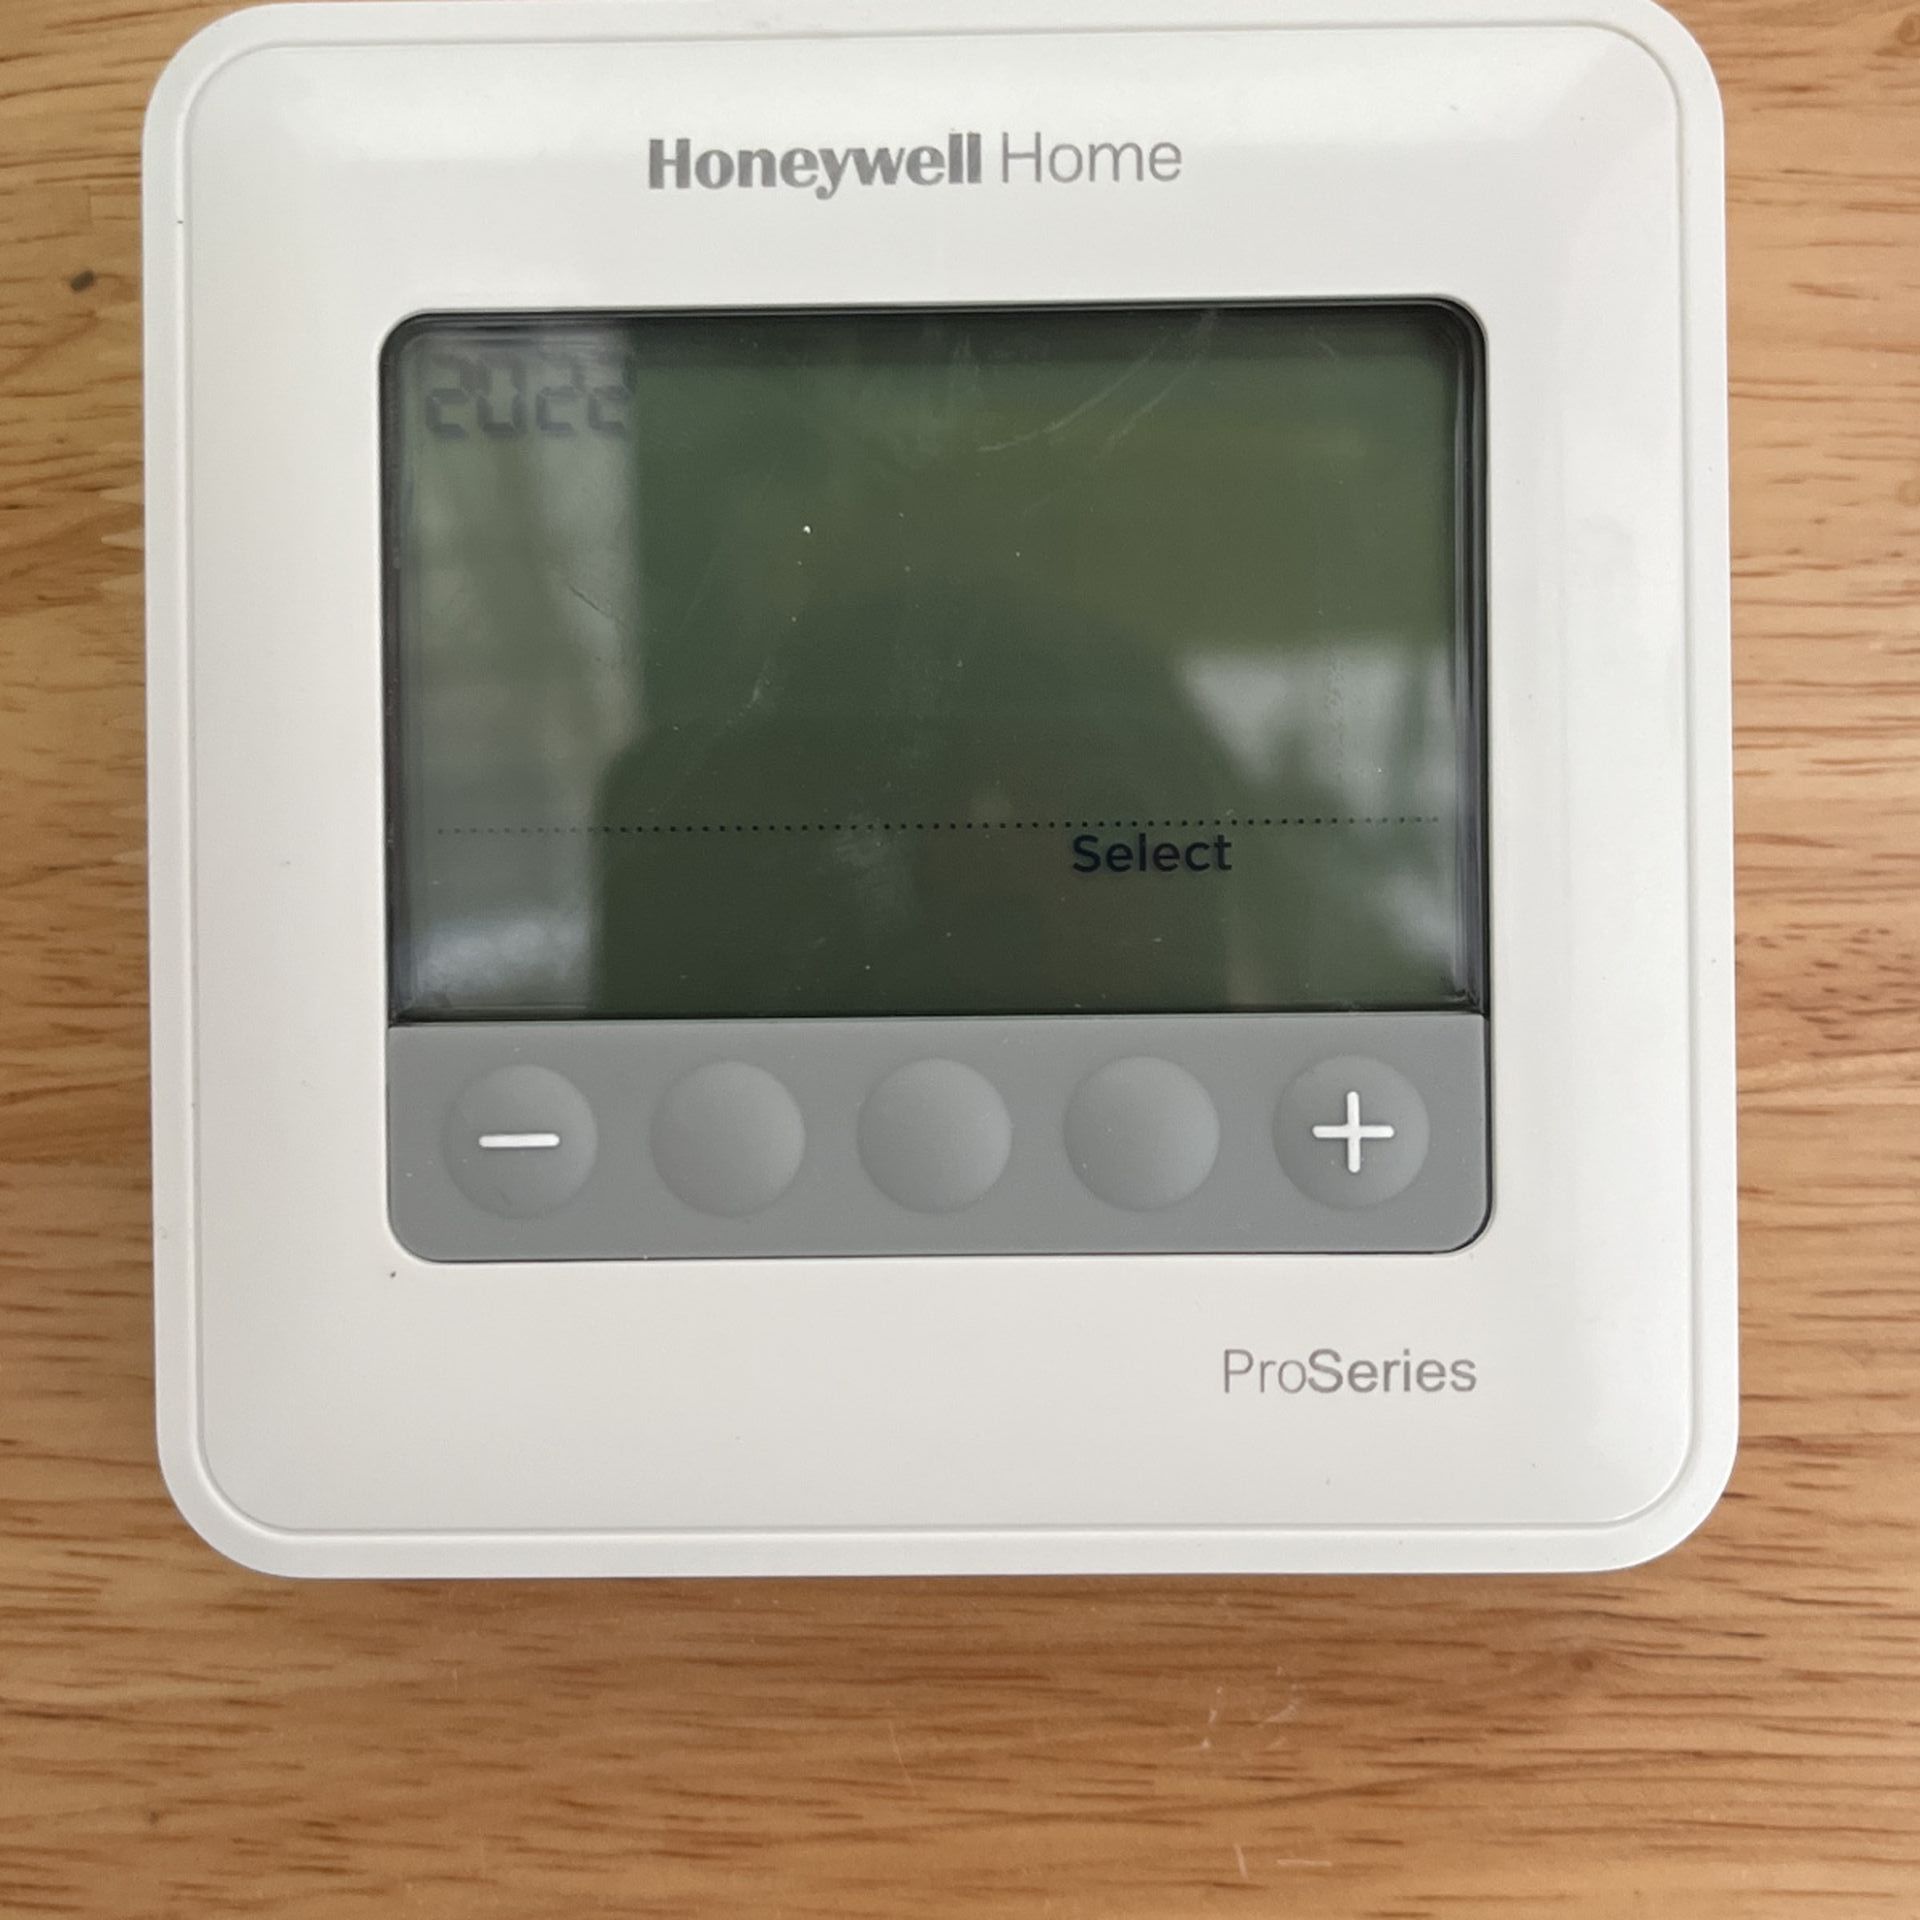 Honeywell Home ProSeries Thermostats